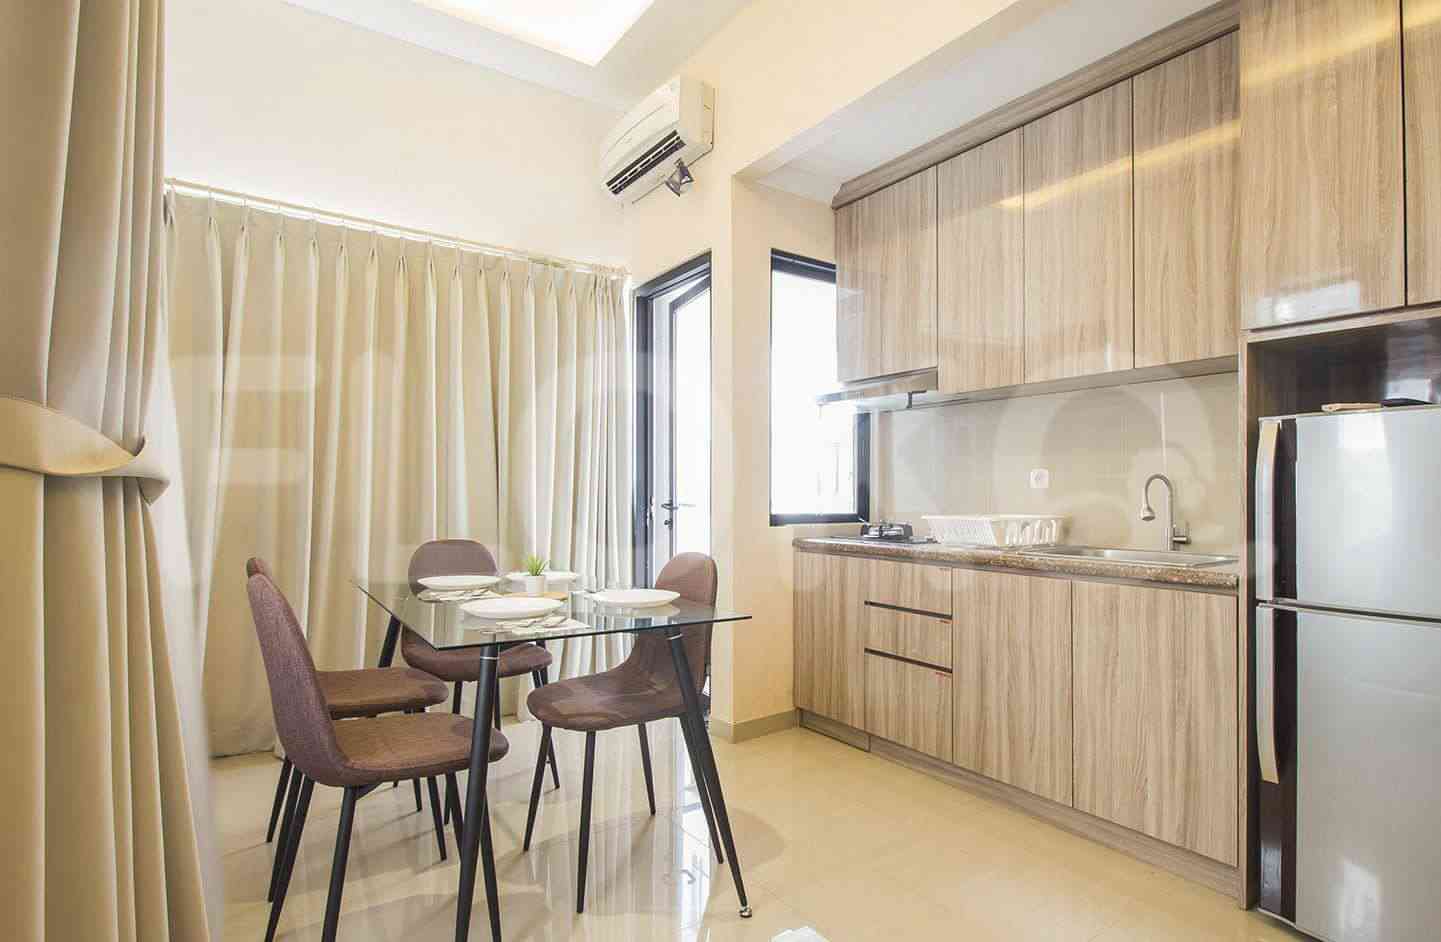 3 Bedroom on 38th Floor for Rent in Sudirman Park Apartment - ftad08 5